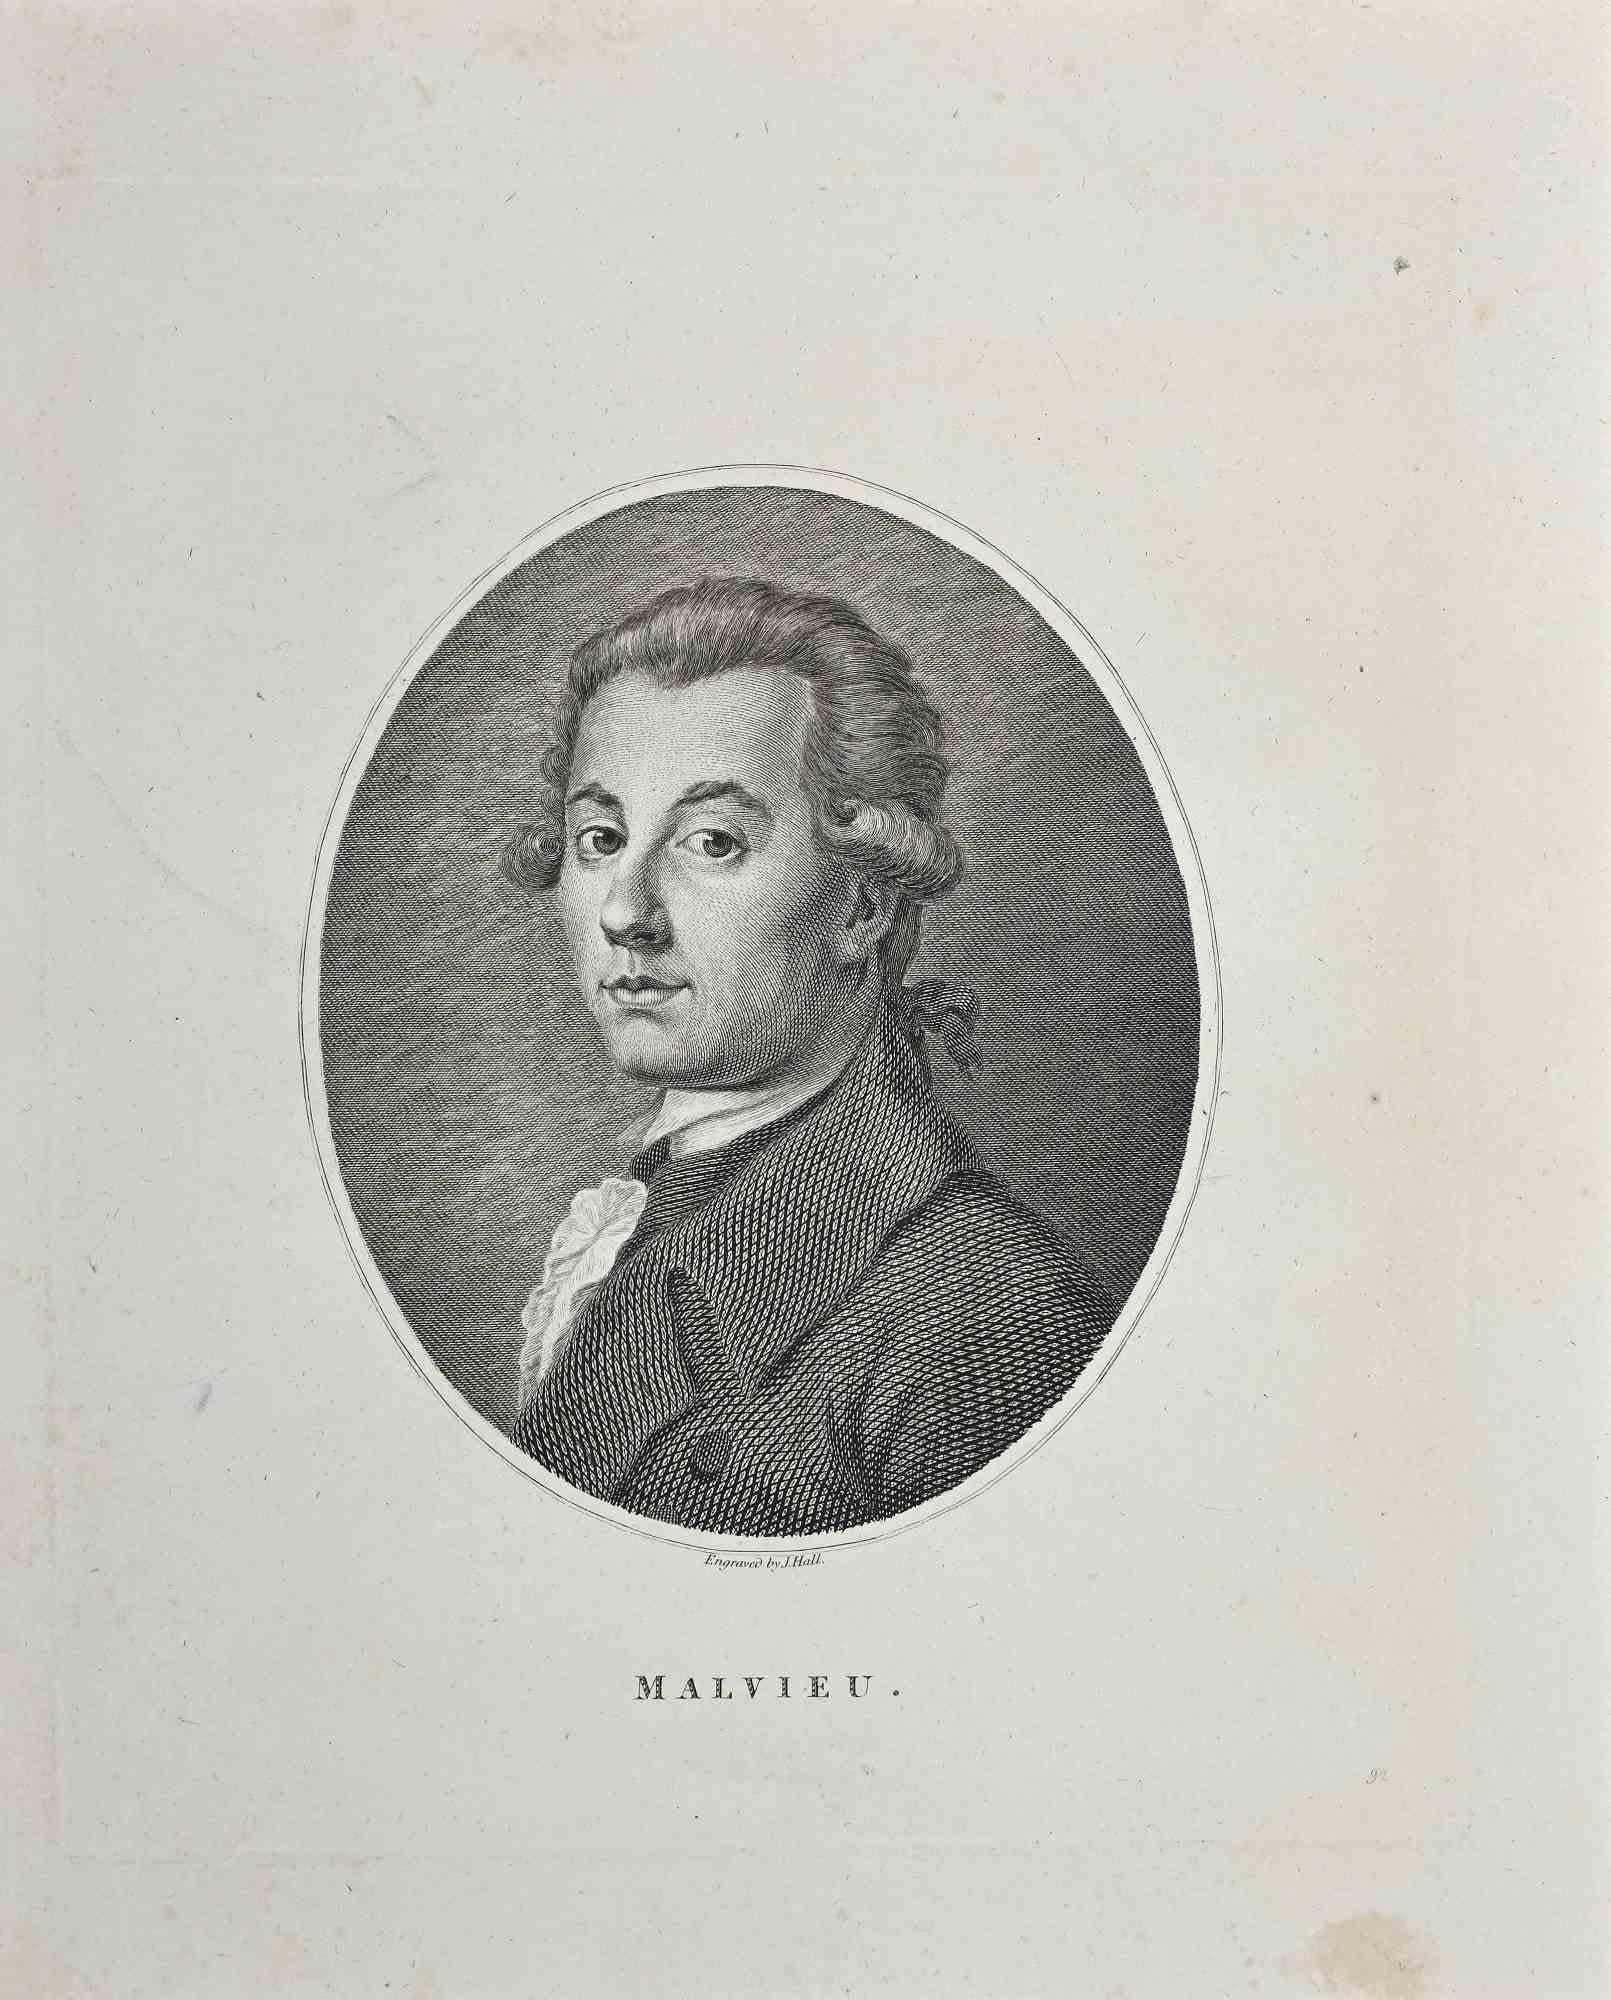 Portrait of Malvieu is an original artwork realized after John Hall (1737 - 1797).

Original Etching from J.C. Lavater's "Essays on Physiognomy, Designed to promote the Knowledge and the Love of Mankind", London, Bensley, 1810. 

A the bottom center